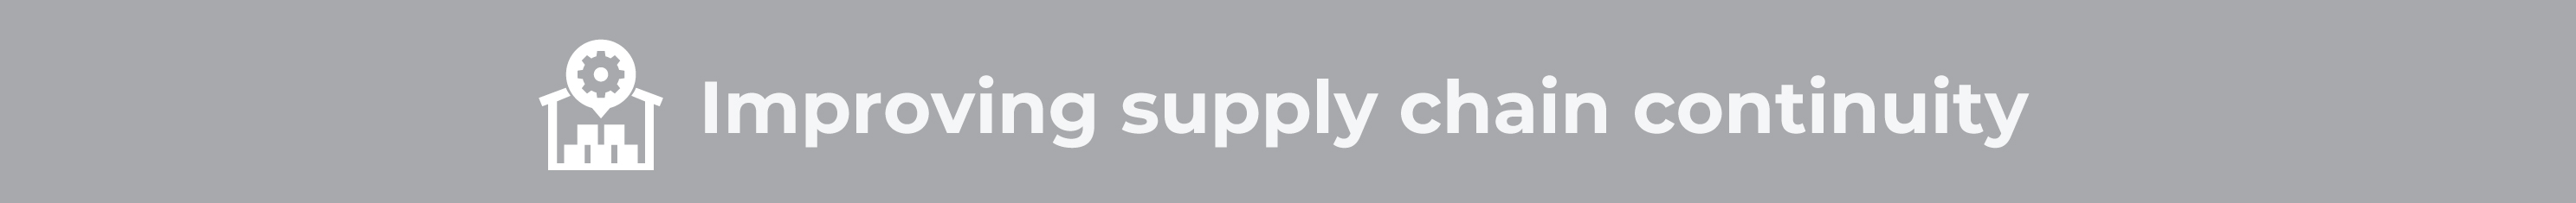 Improving supply chain continuity